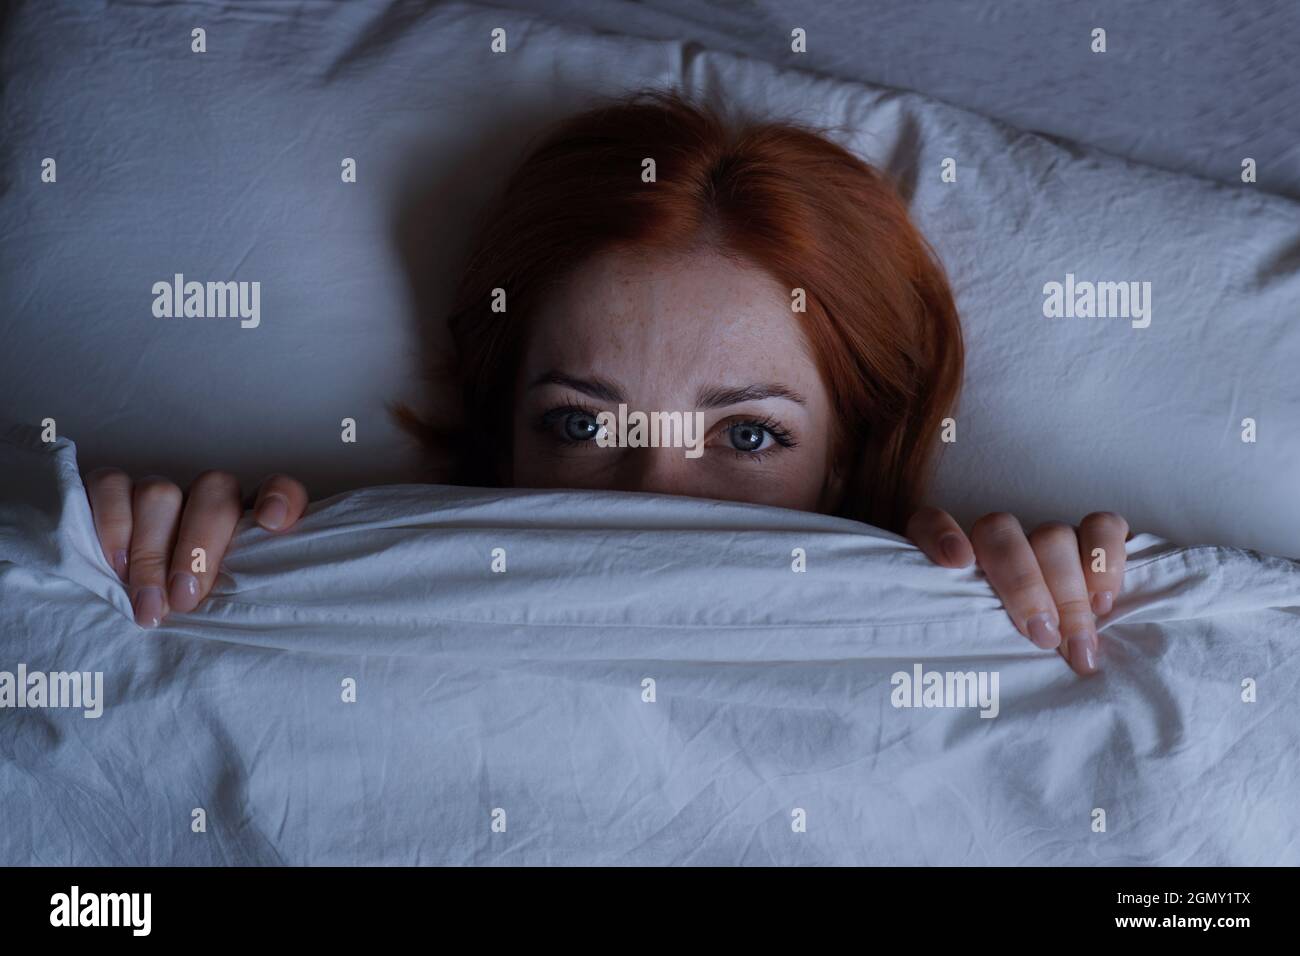 sleepless woman lying in bed hiding under duvet at night Stock Photo